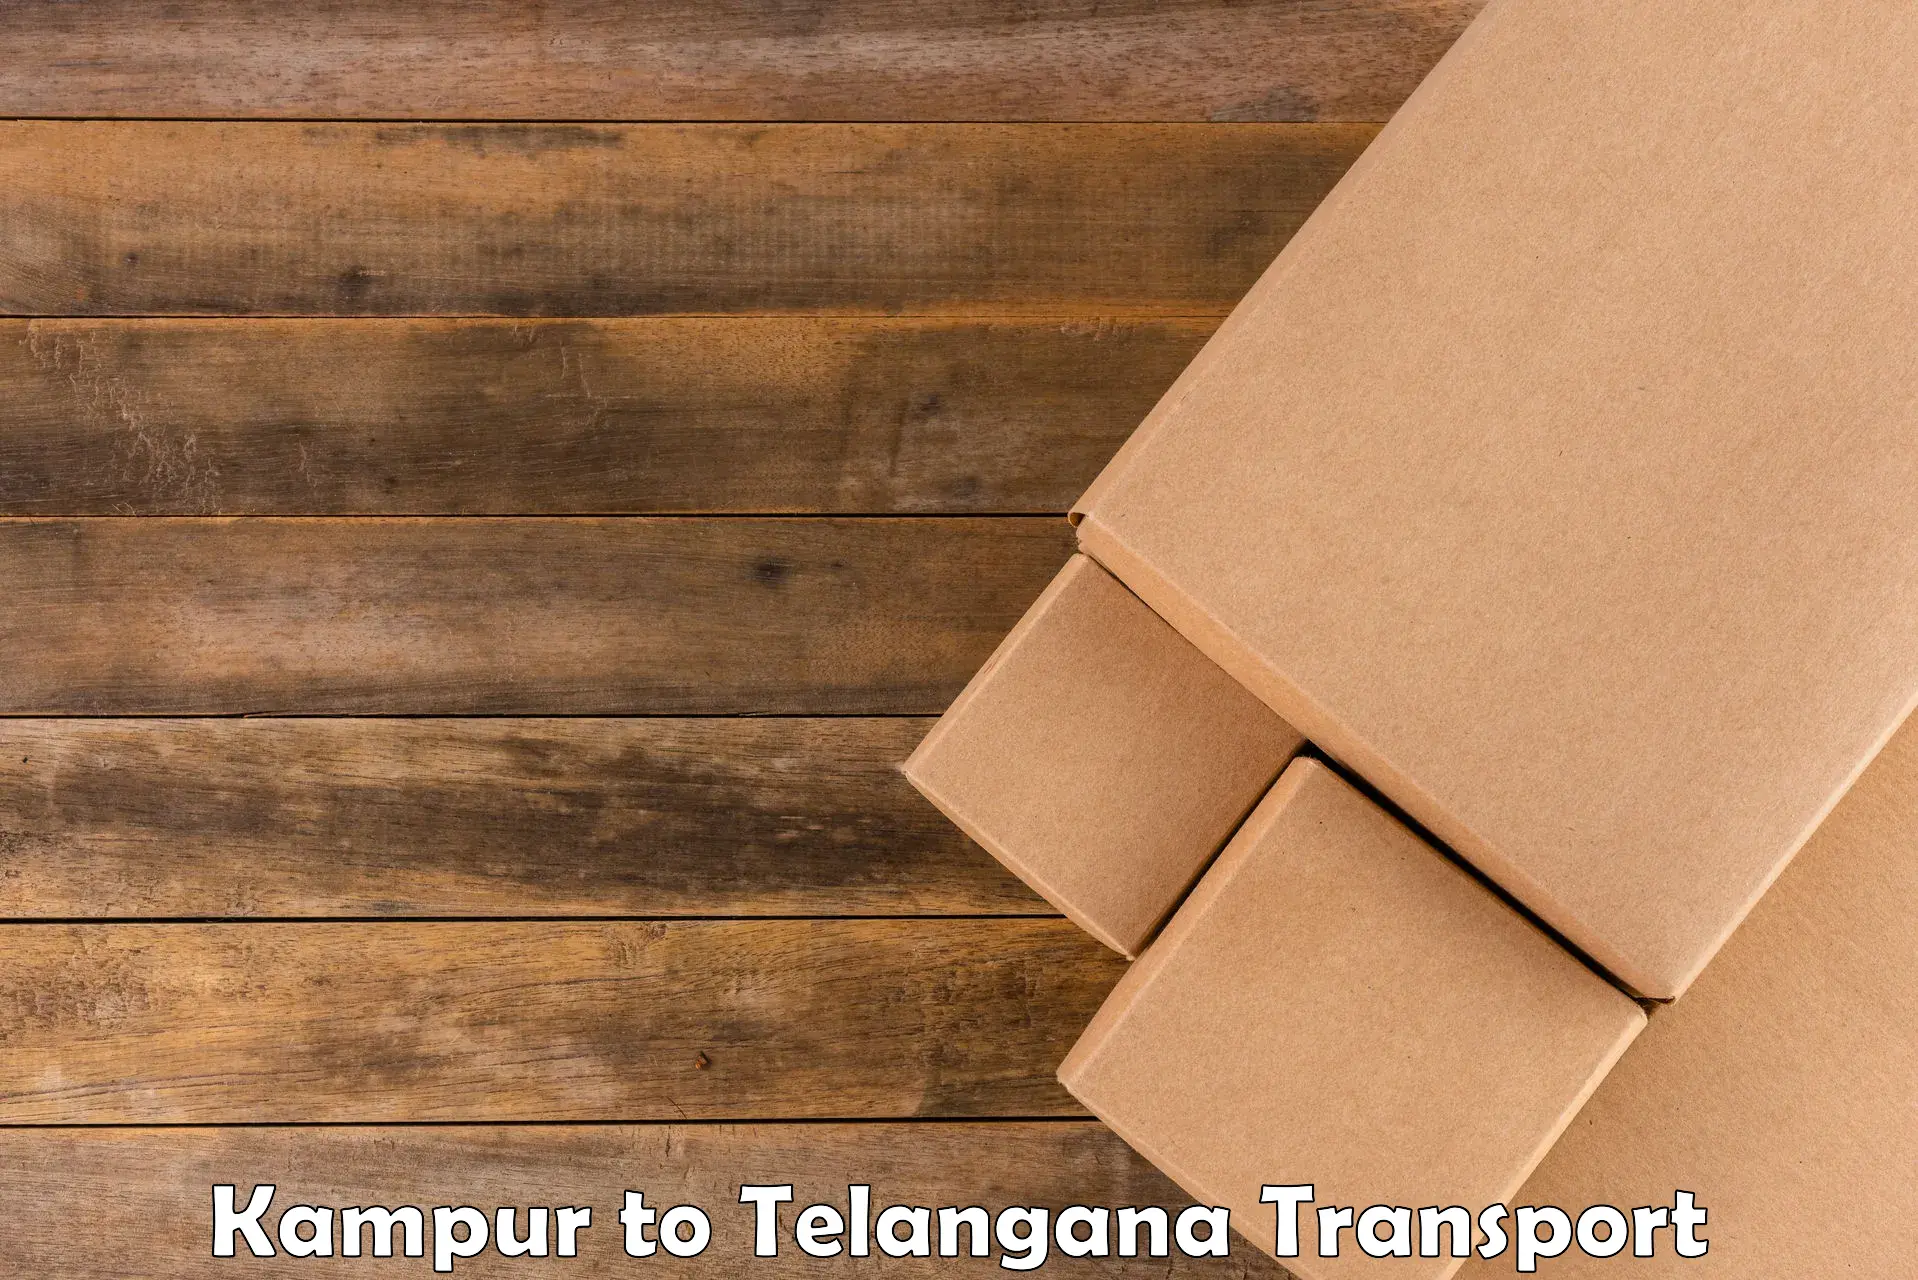 Delivery service Kampur to Telangana